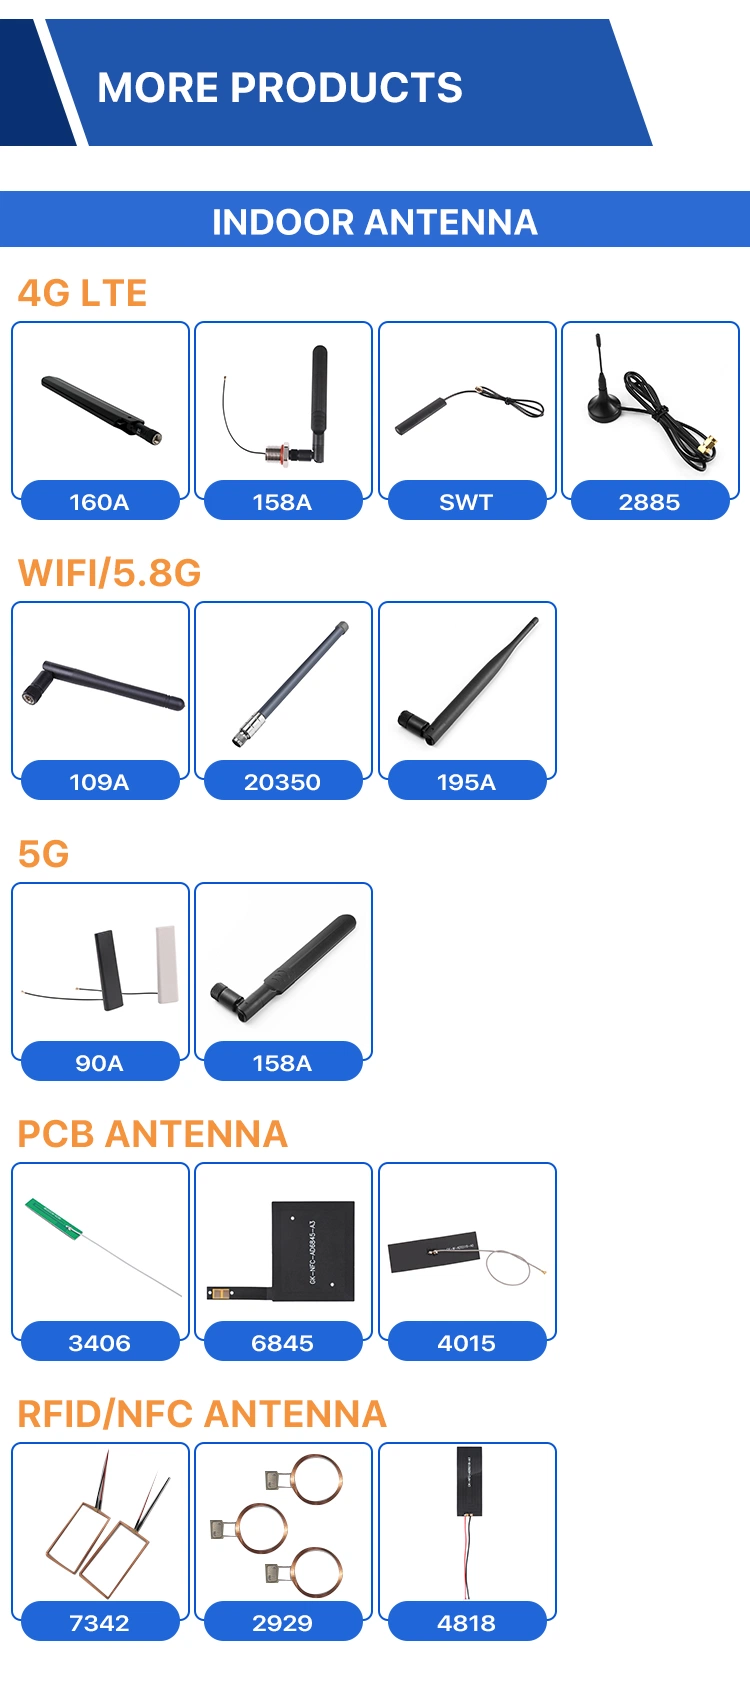 High Gain 2.4G WiFi Antenna Rubber Duck Antenna with SMA Male Connector RF Adapter Omni-Directional WiFi Router